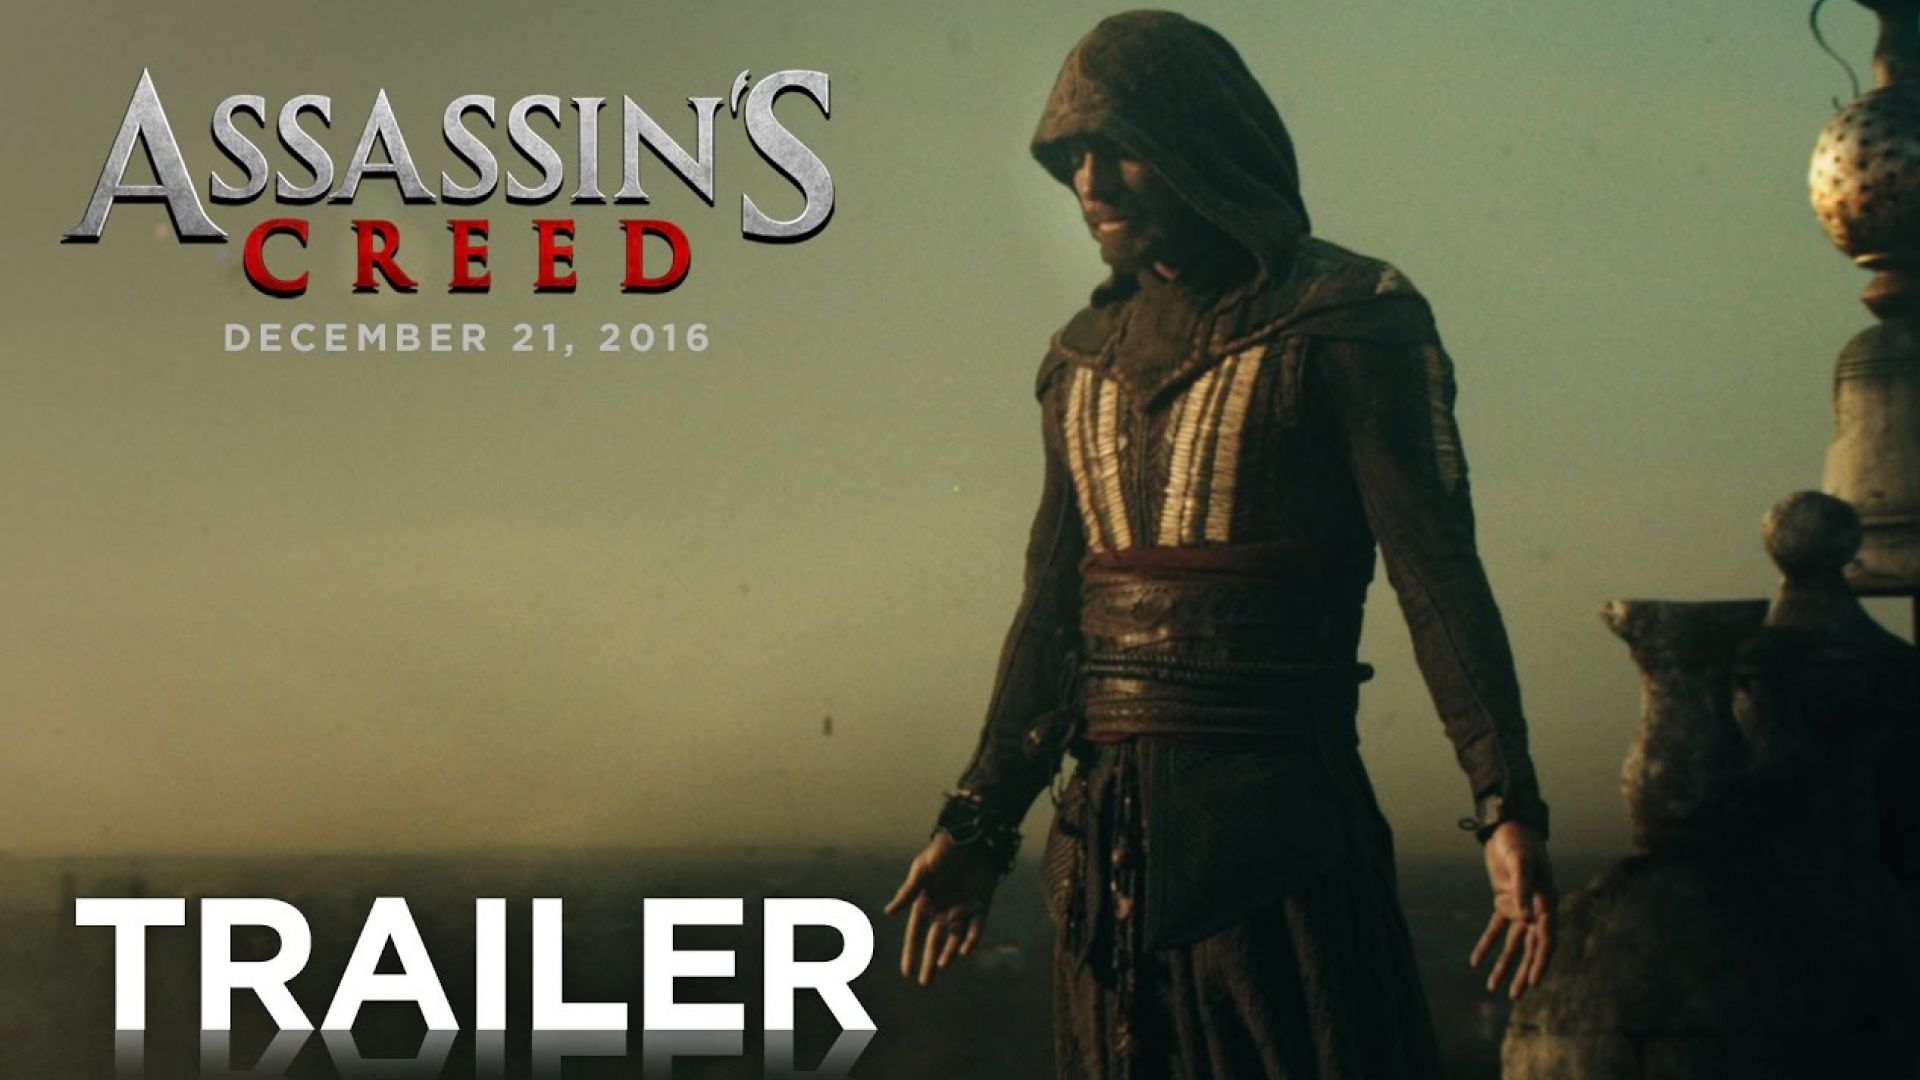 The new &#039;Assassin’s Creed&#039; trailer is out.